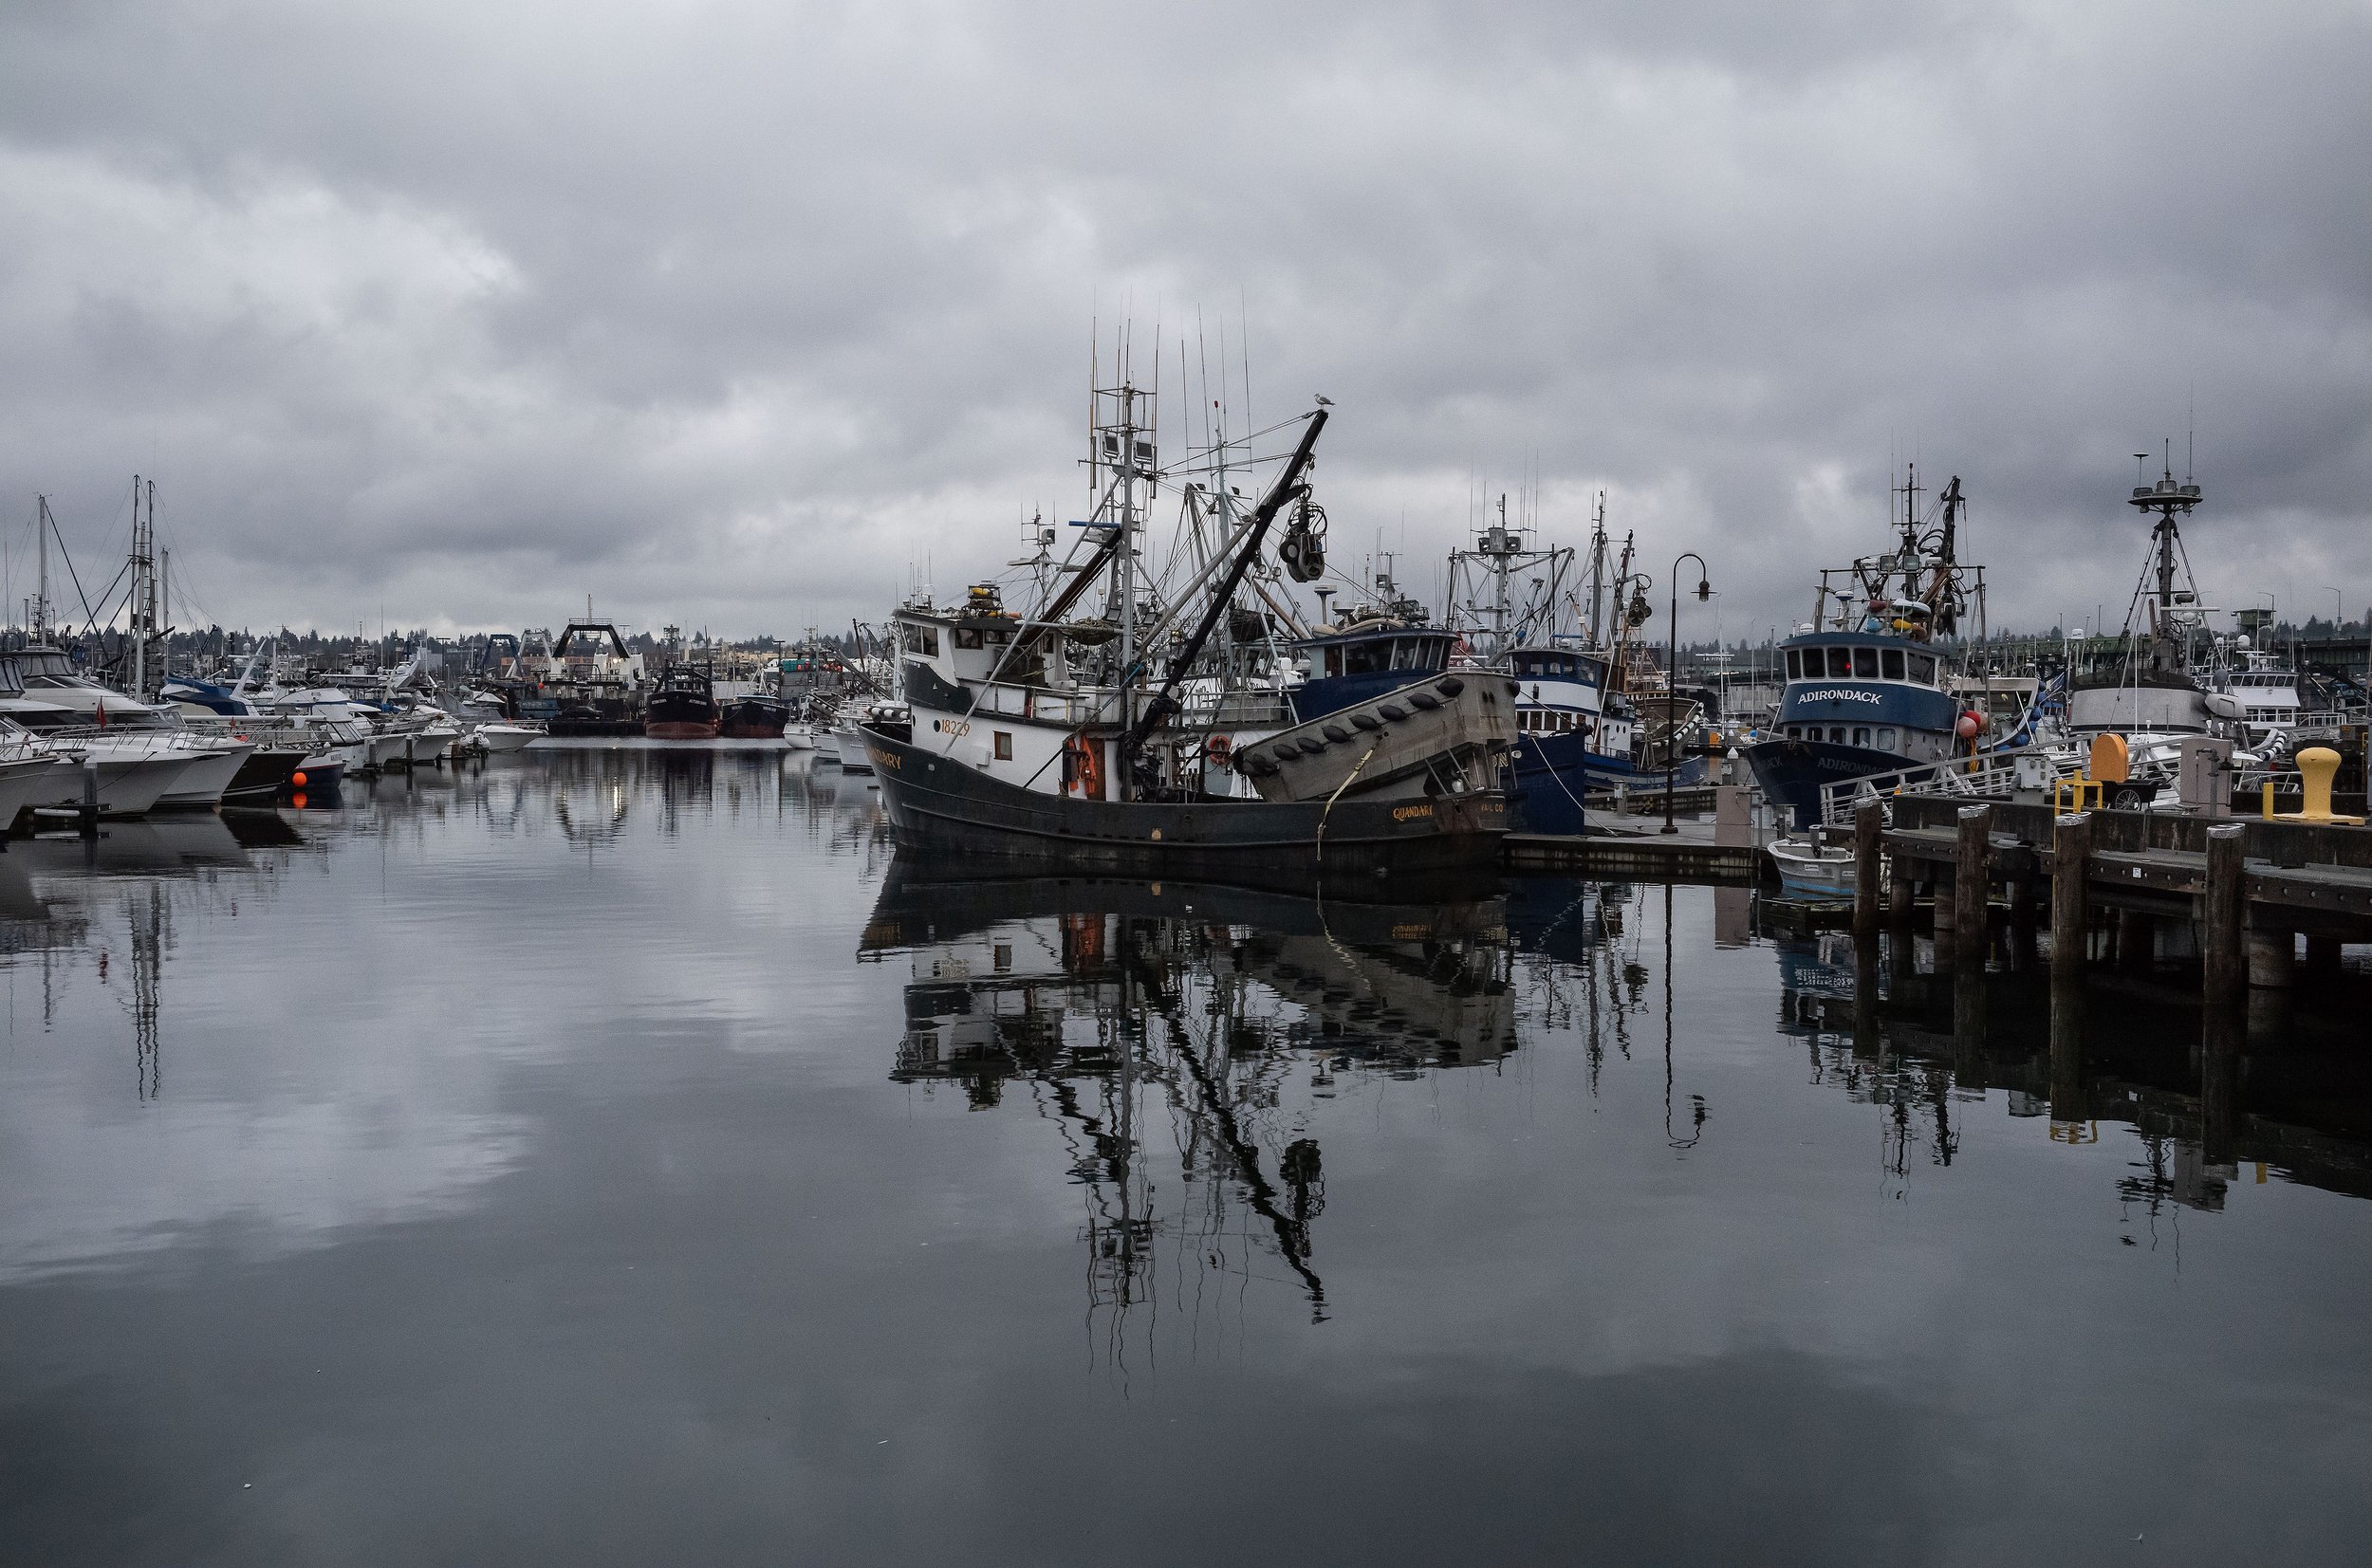  Fishermen’s Terminal, home of the North Pacific Fishing Fleet that operates in Alaska, is seen under grey skies in Seattle, Washington, USA on December 4, 2021. 